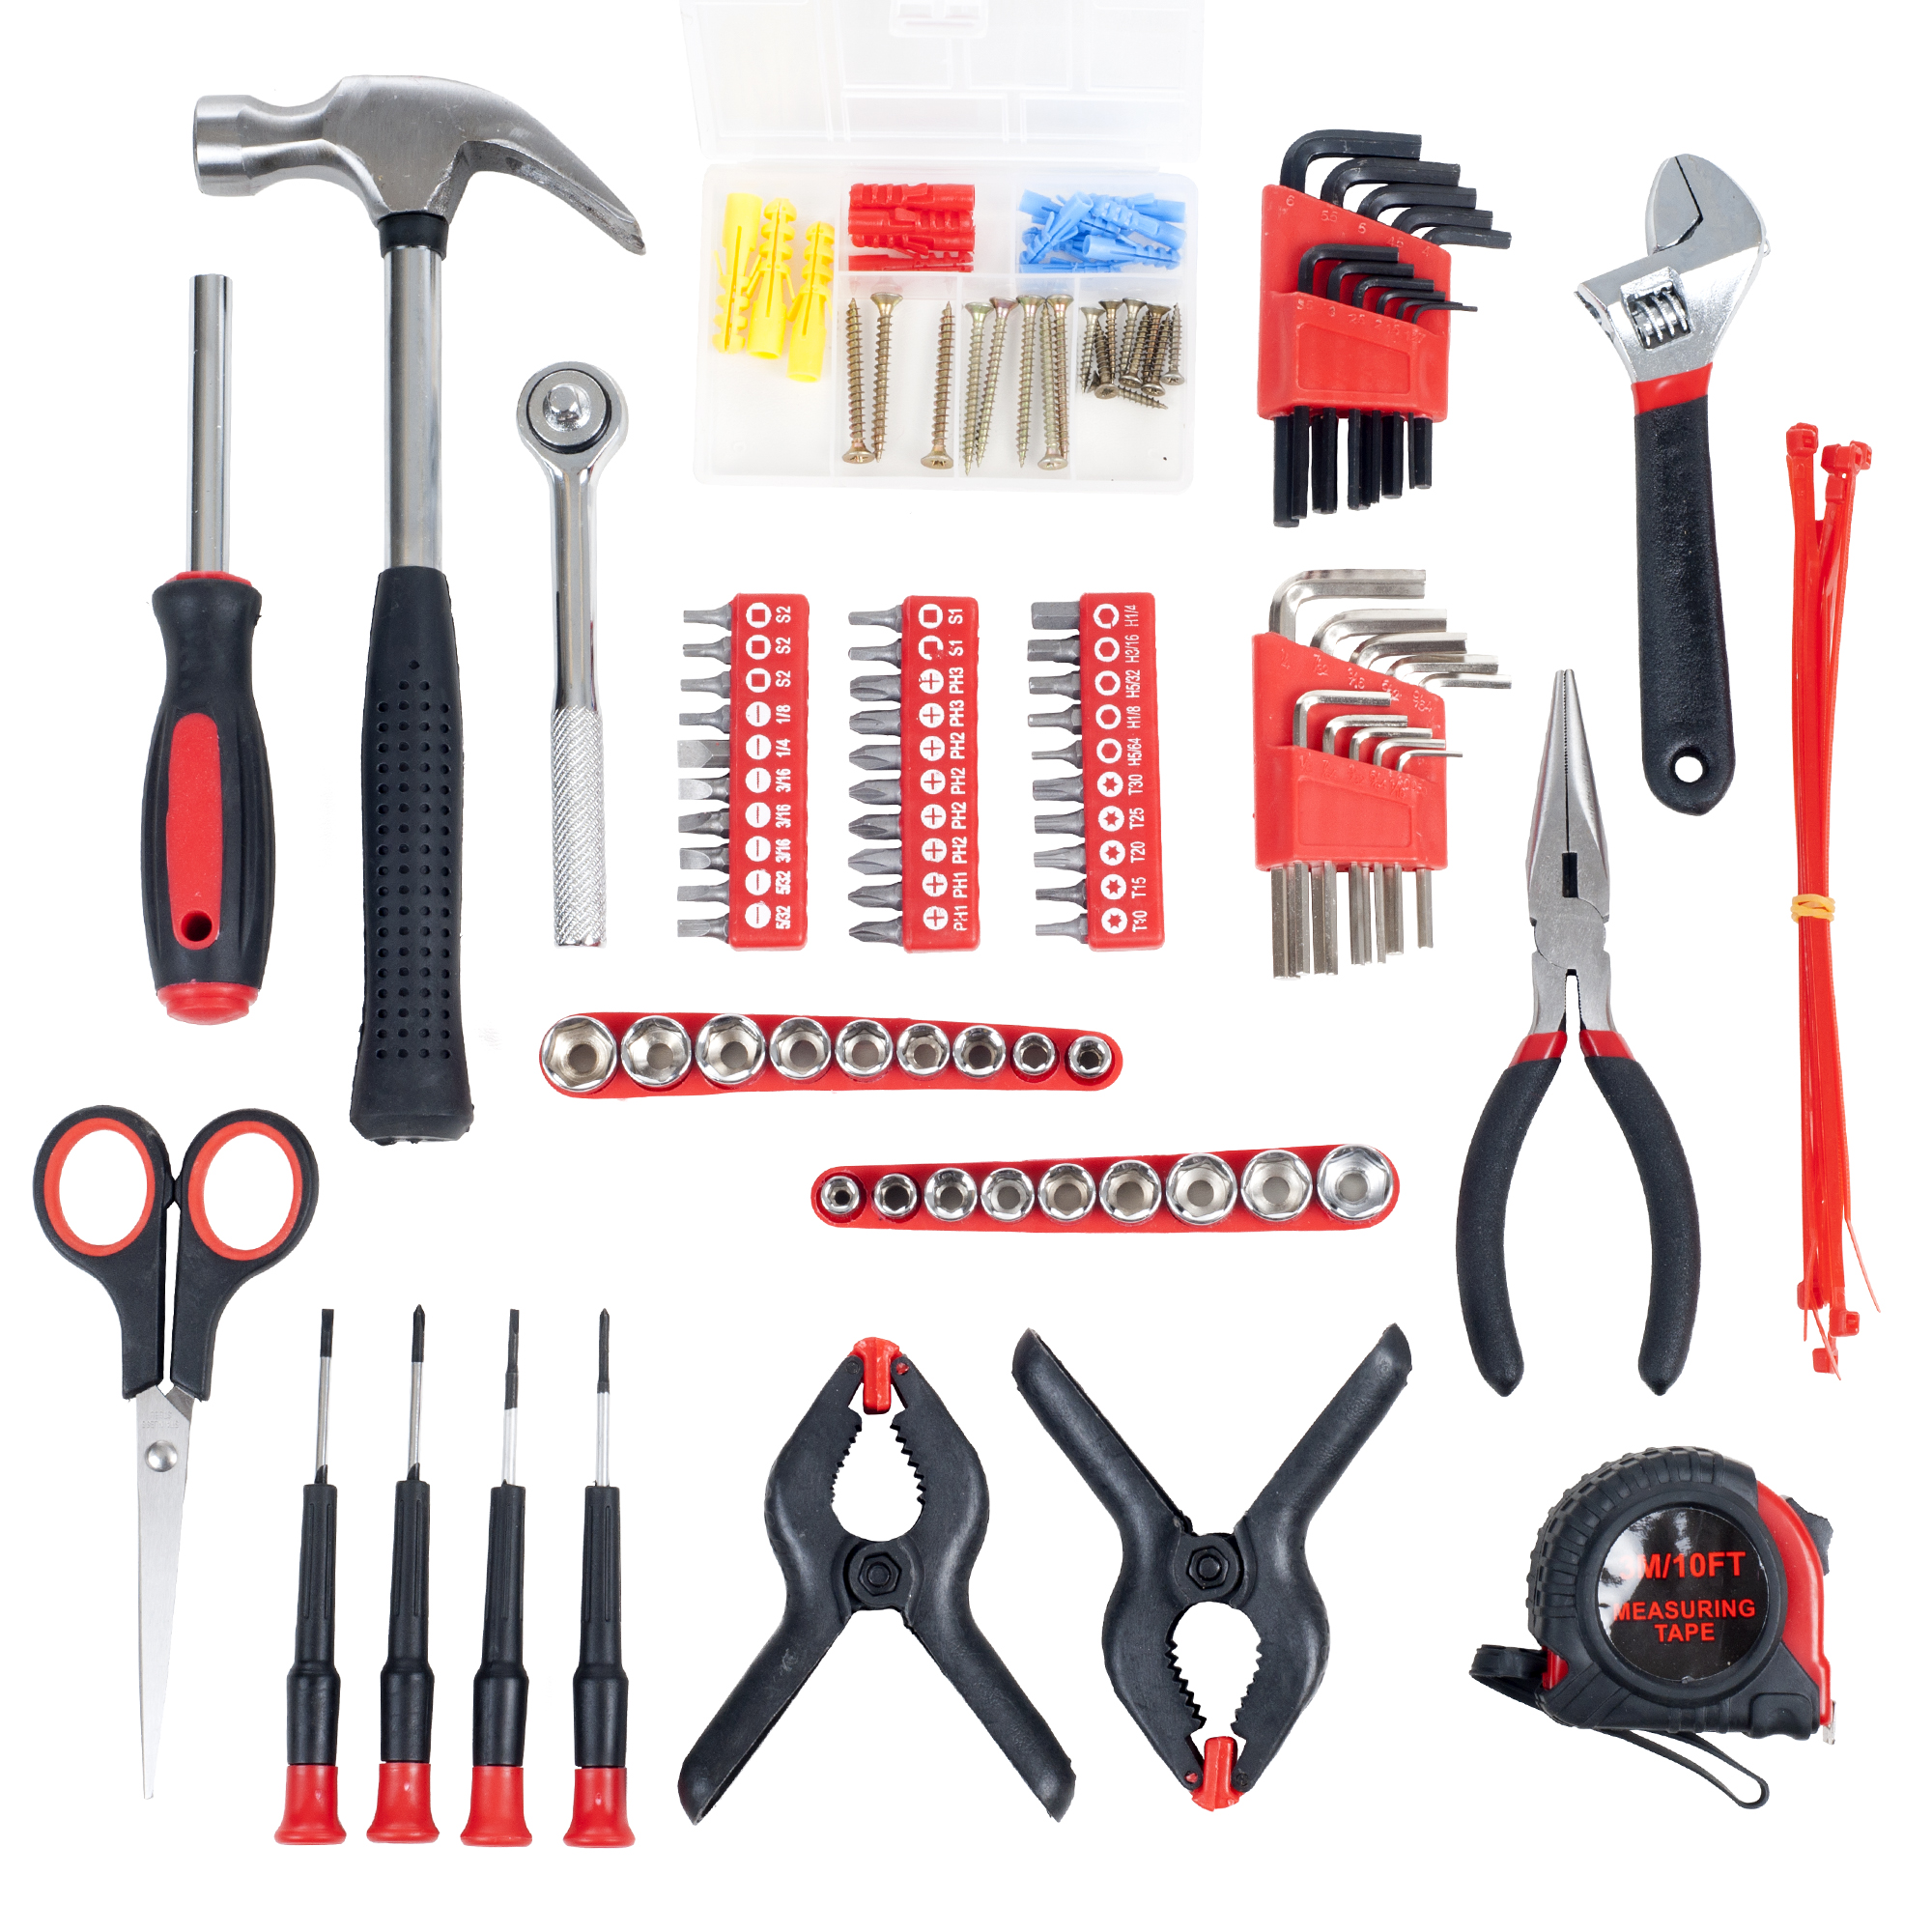 Stalwart 86 Piece Tool Kit - Household Car & Office in Roll Up Bag - Free Shipping